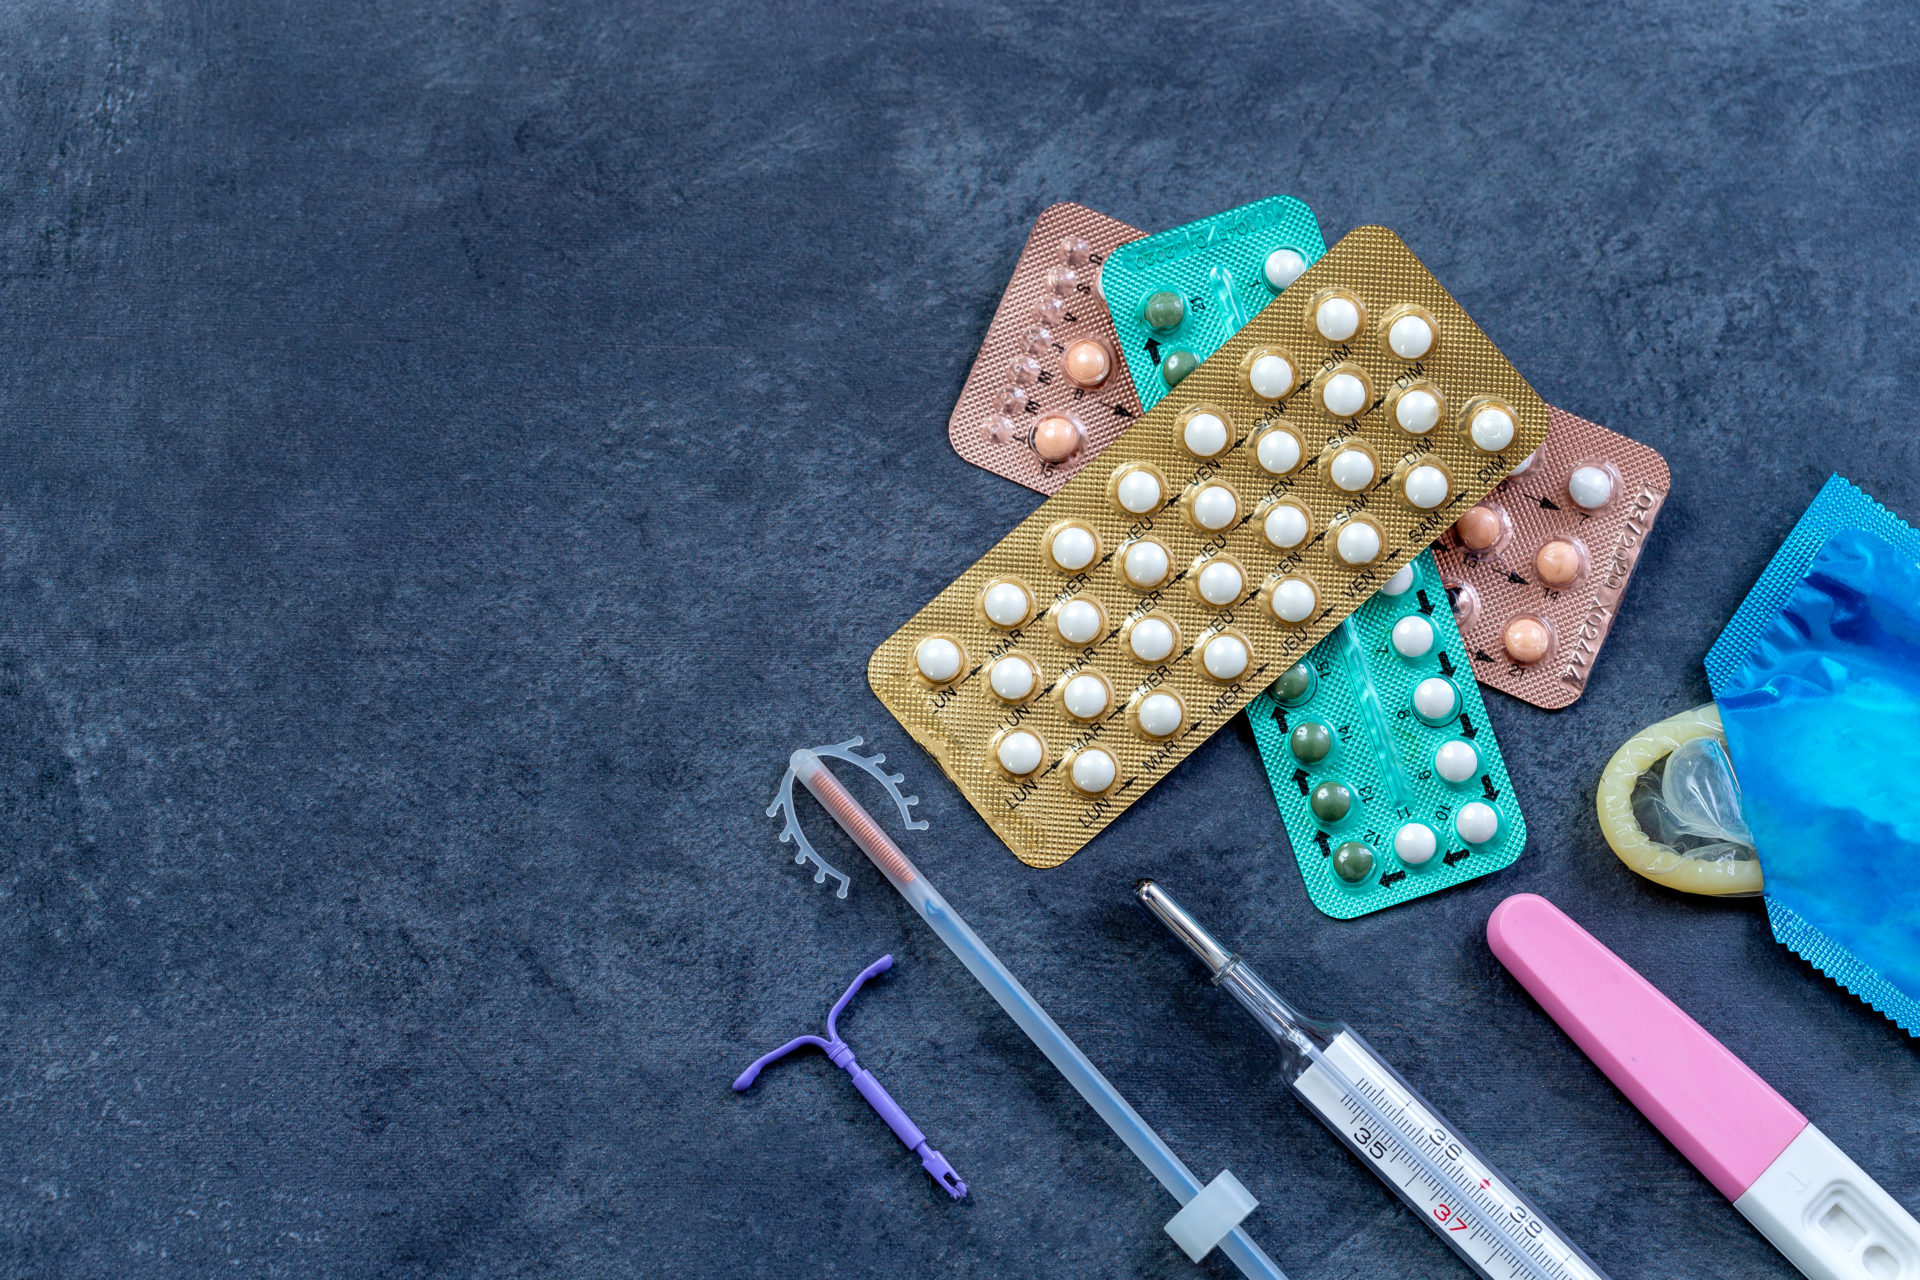 Picture of different contraceptive methods: birth control pills, an injection syringe and condom, IUD. Adobe Photos